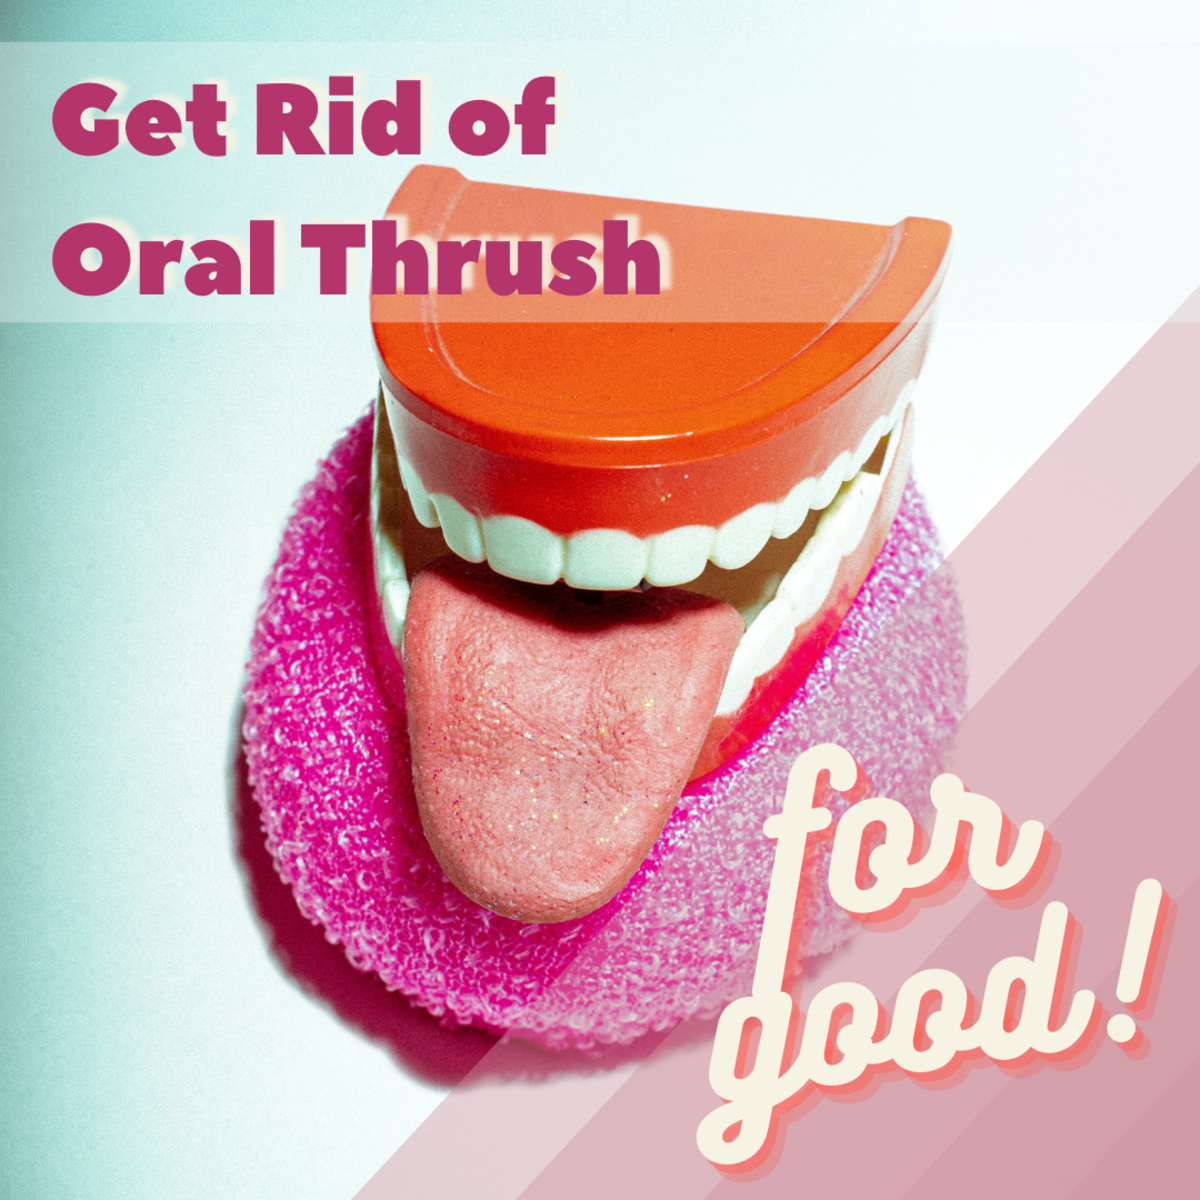 Get rid of oral thrush for good!